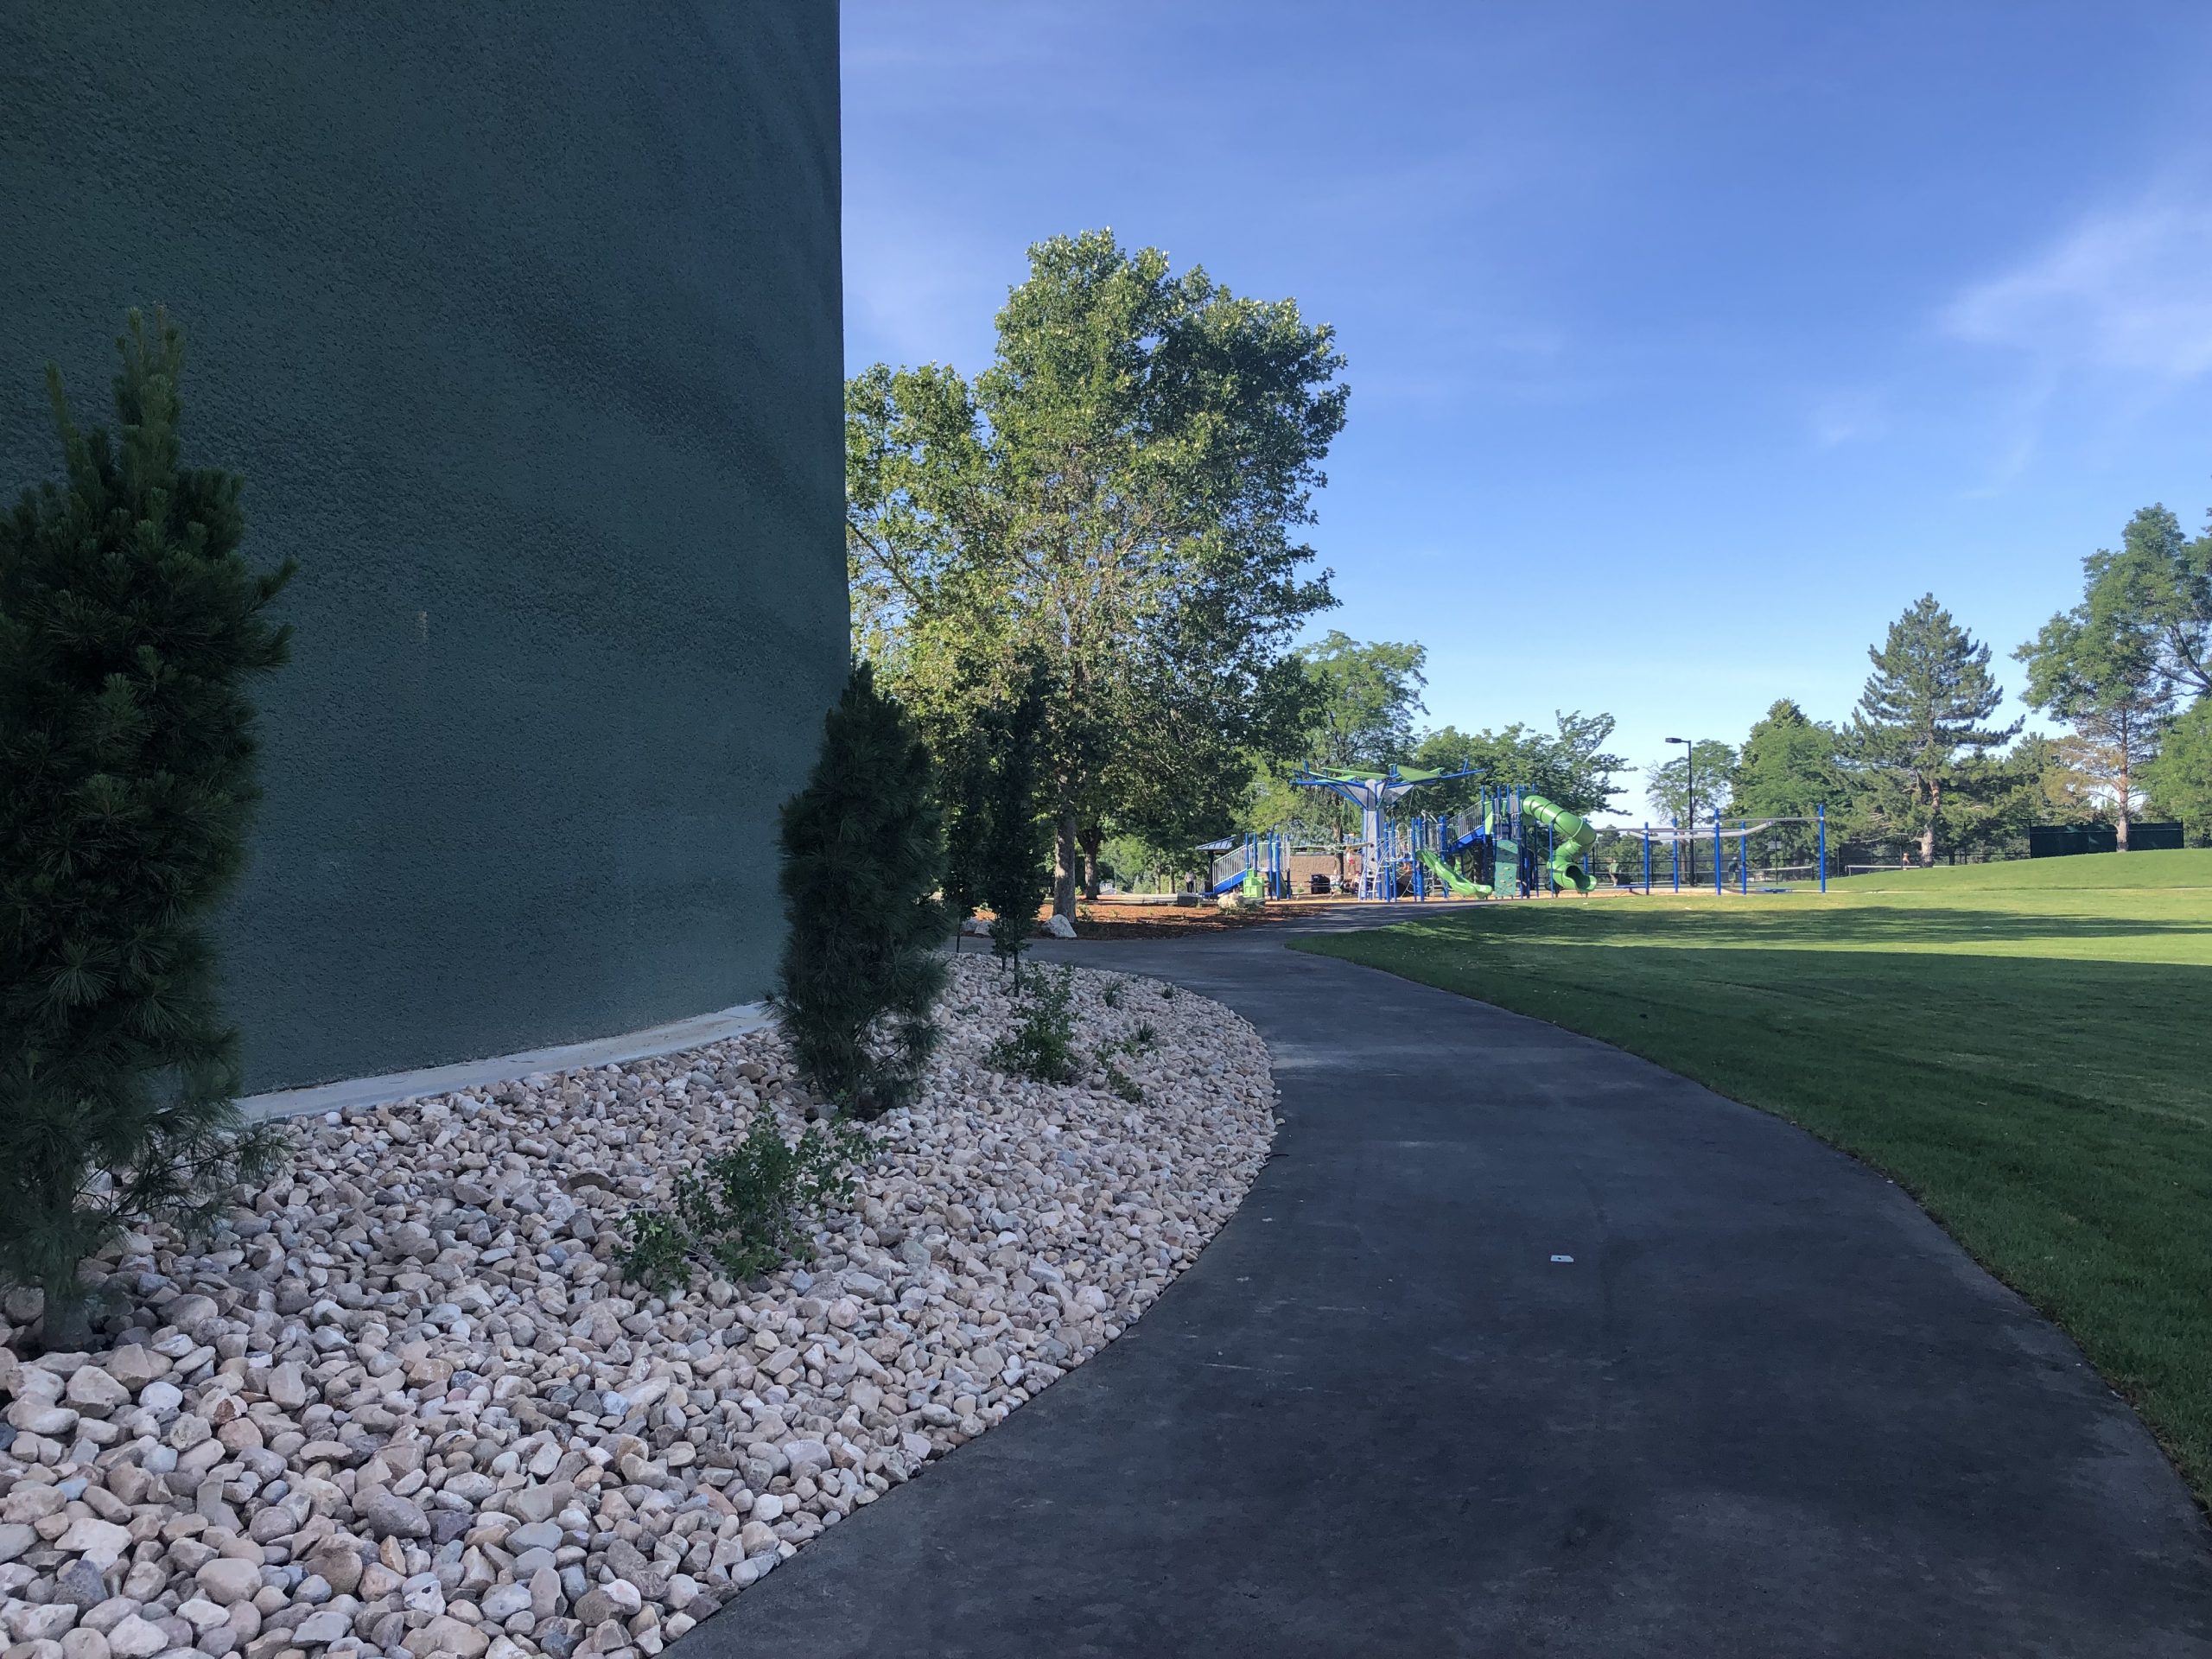 Sidewalk that goes around circular concrete tank beside park with grass and playground.